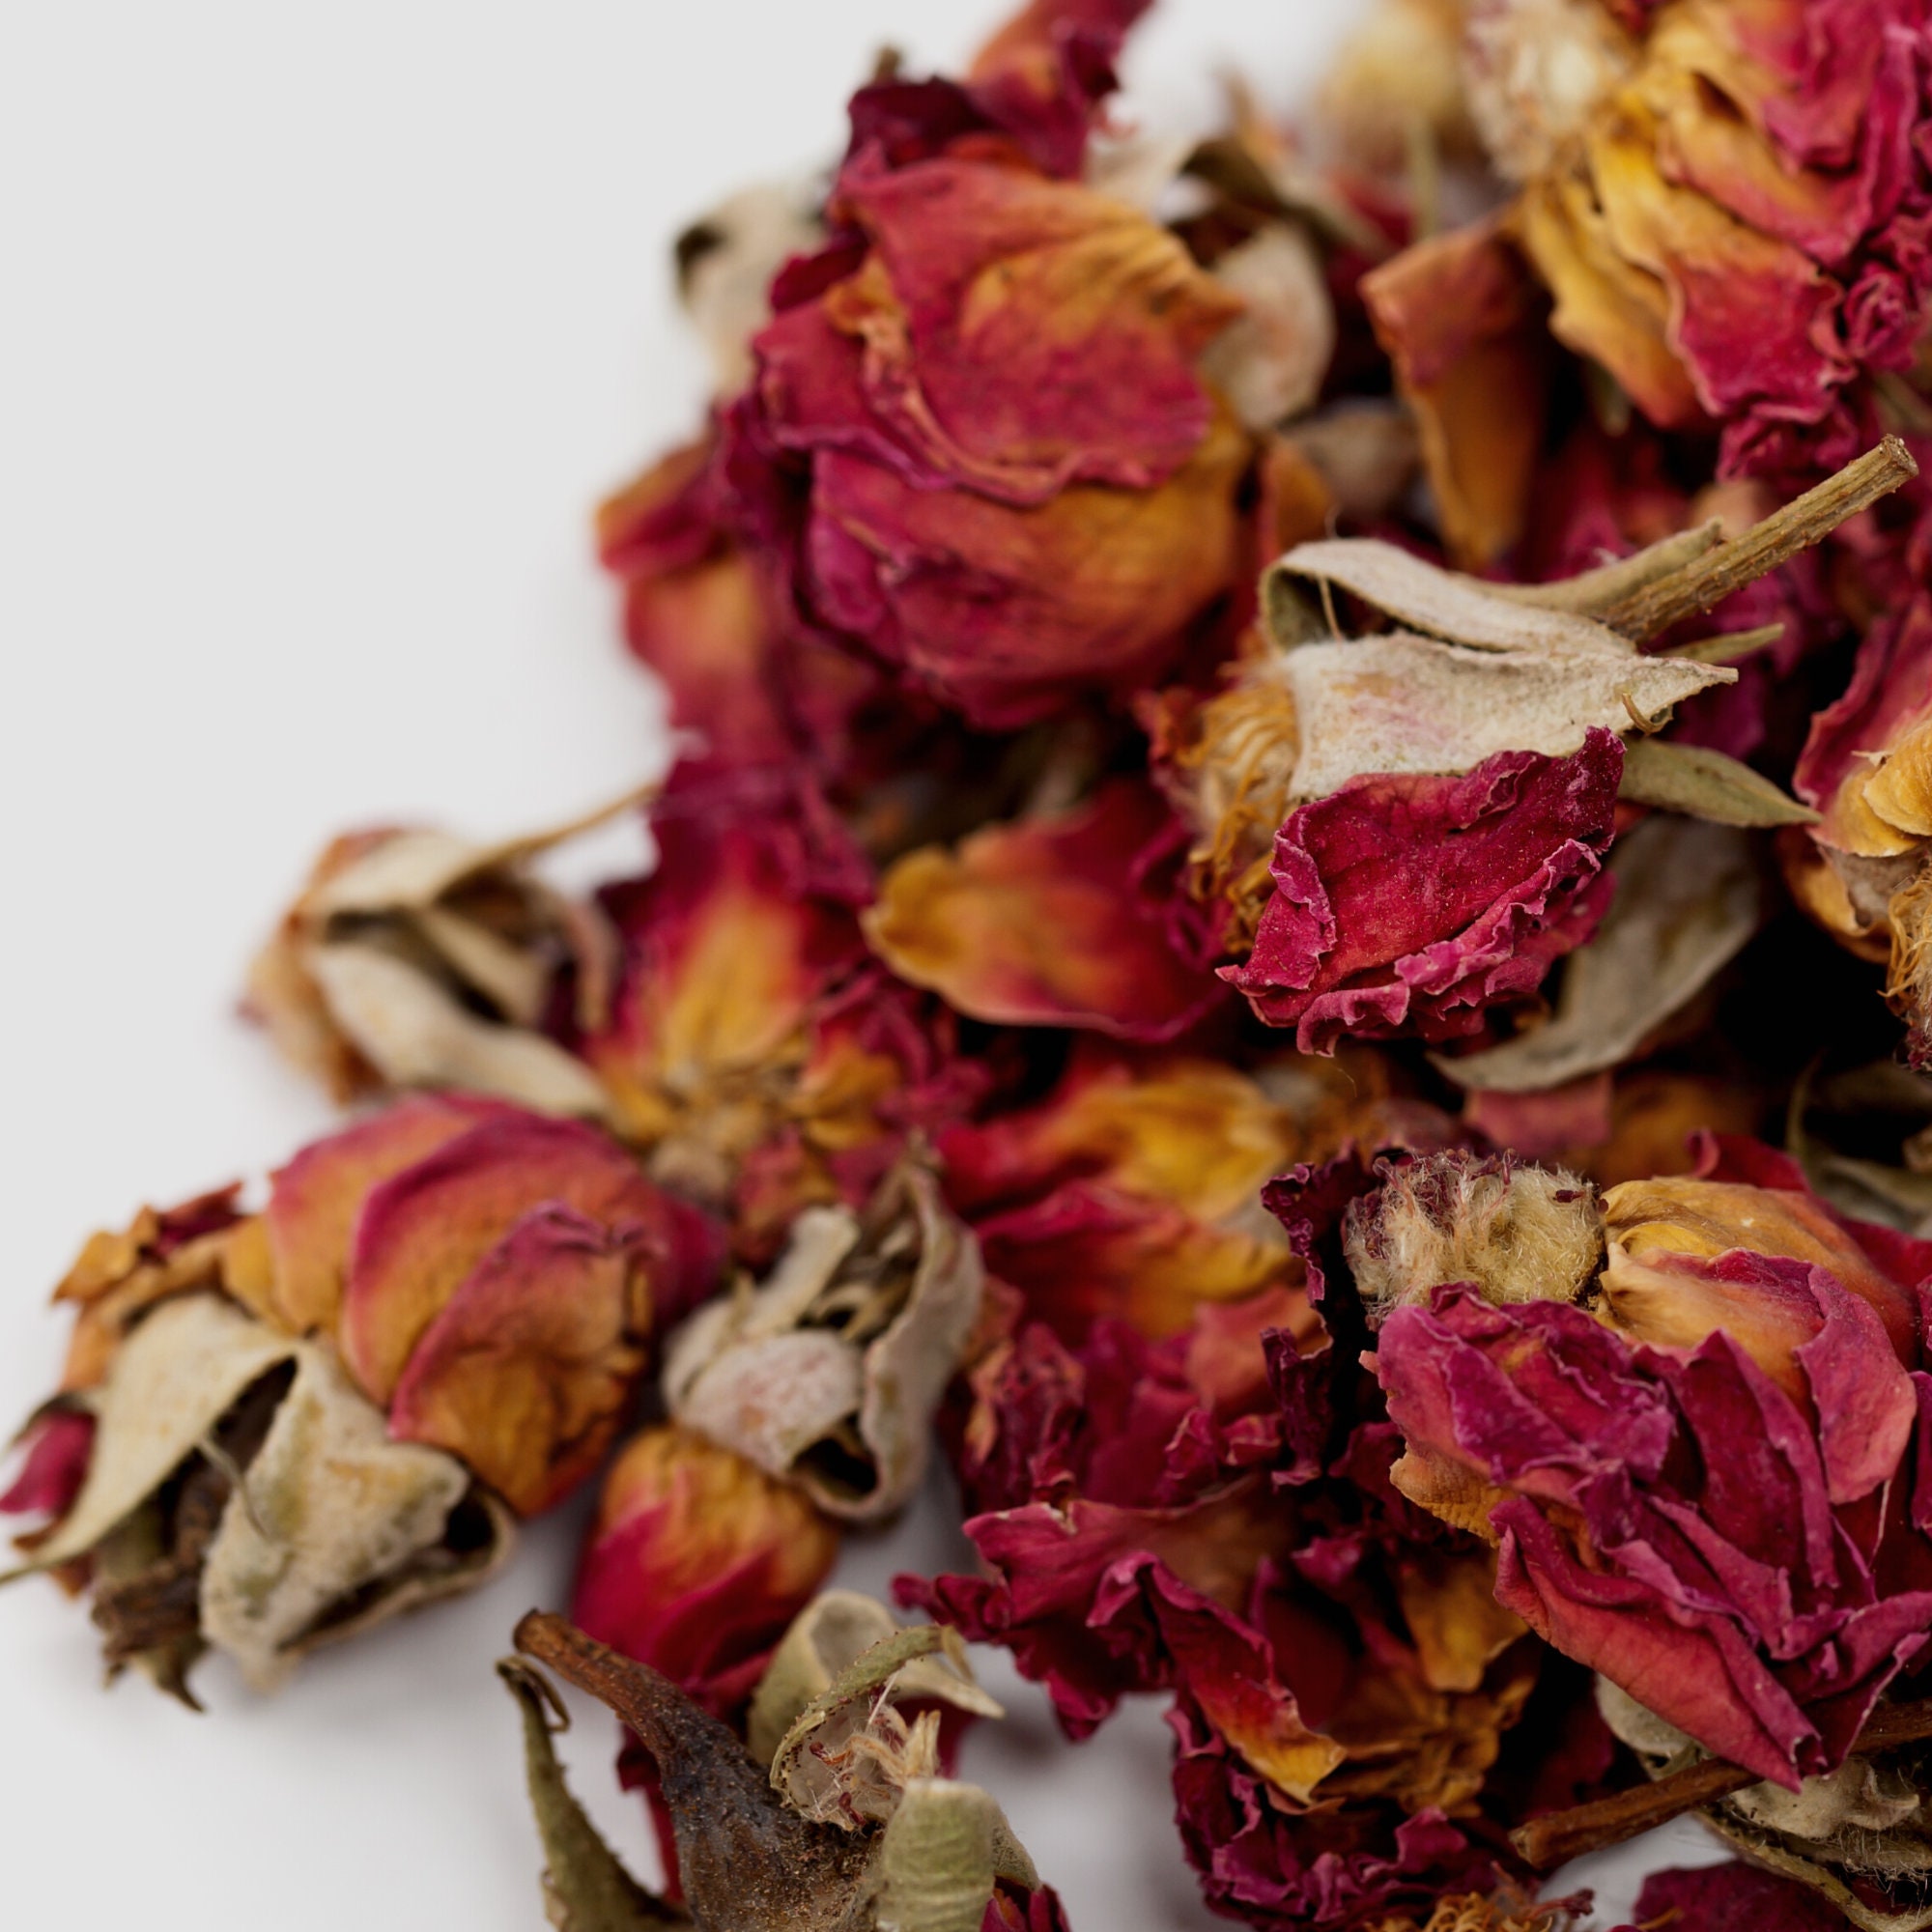 Pink Red Rose Buds, Petals Dried Rose Flowers, Craft Tea, Potpourri Soap  Candle